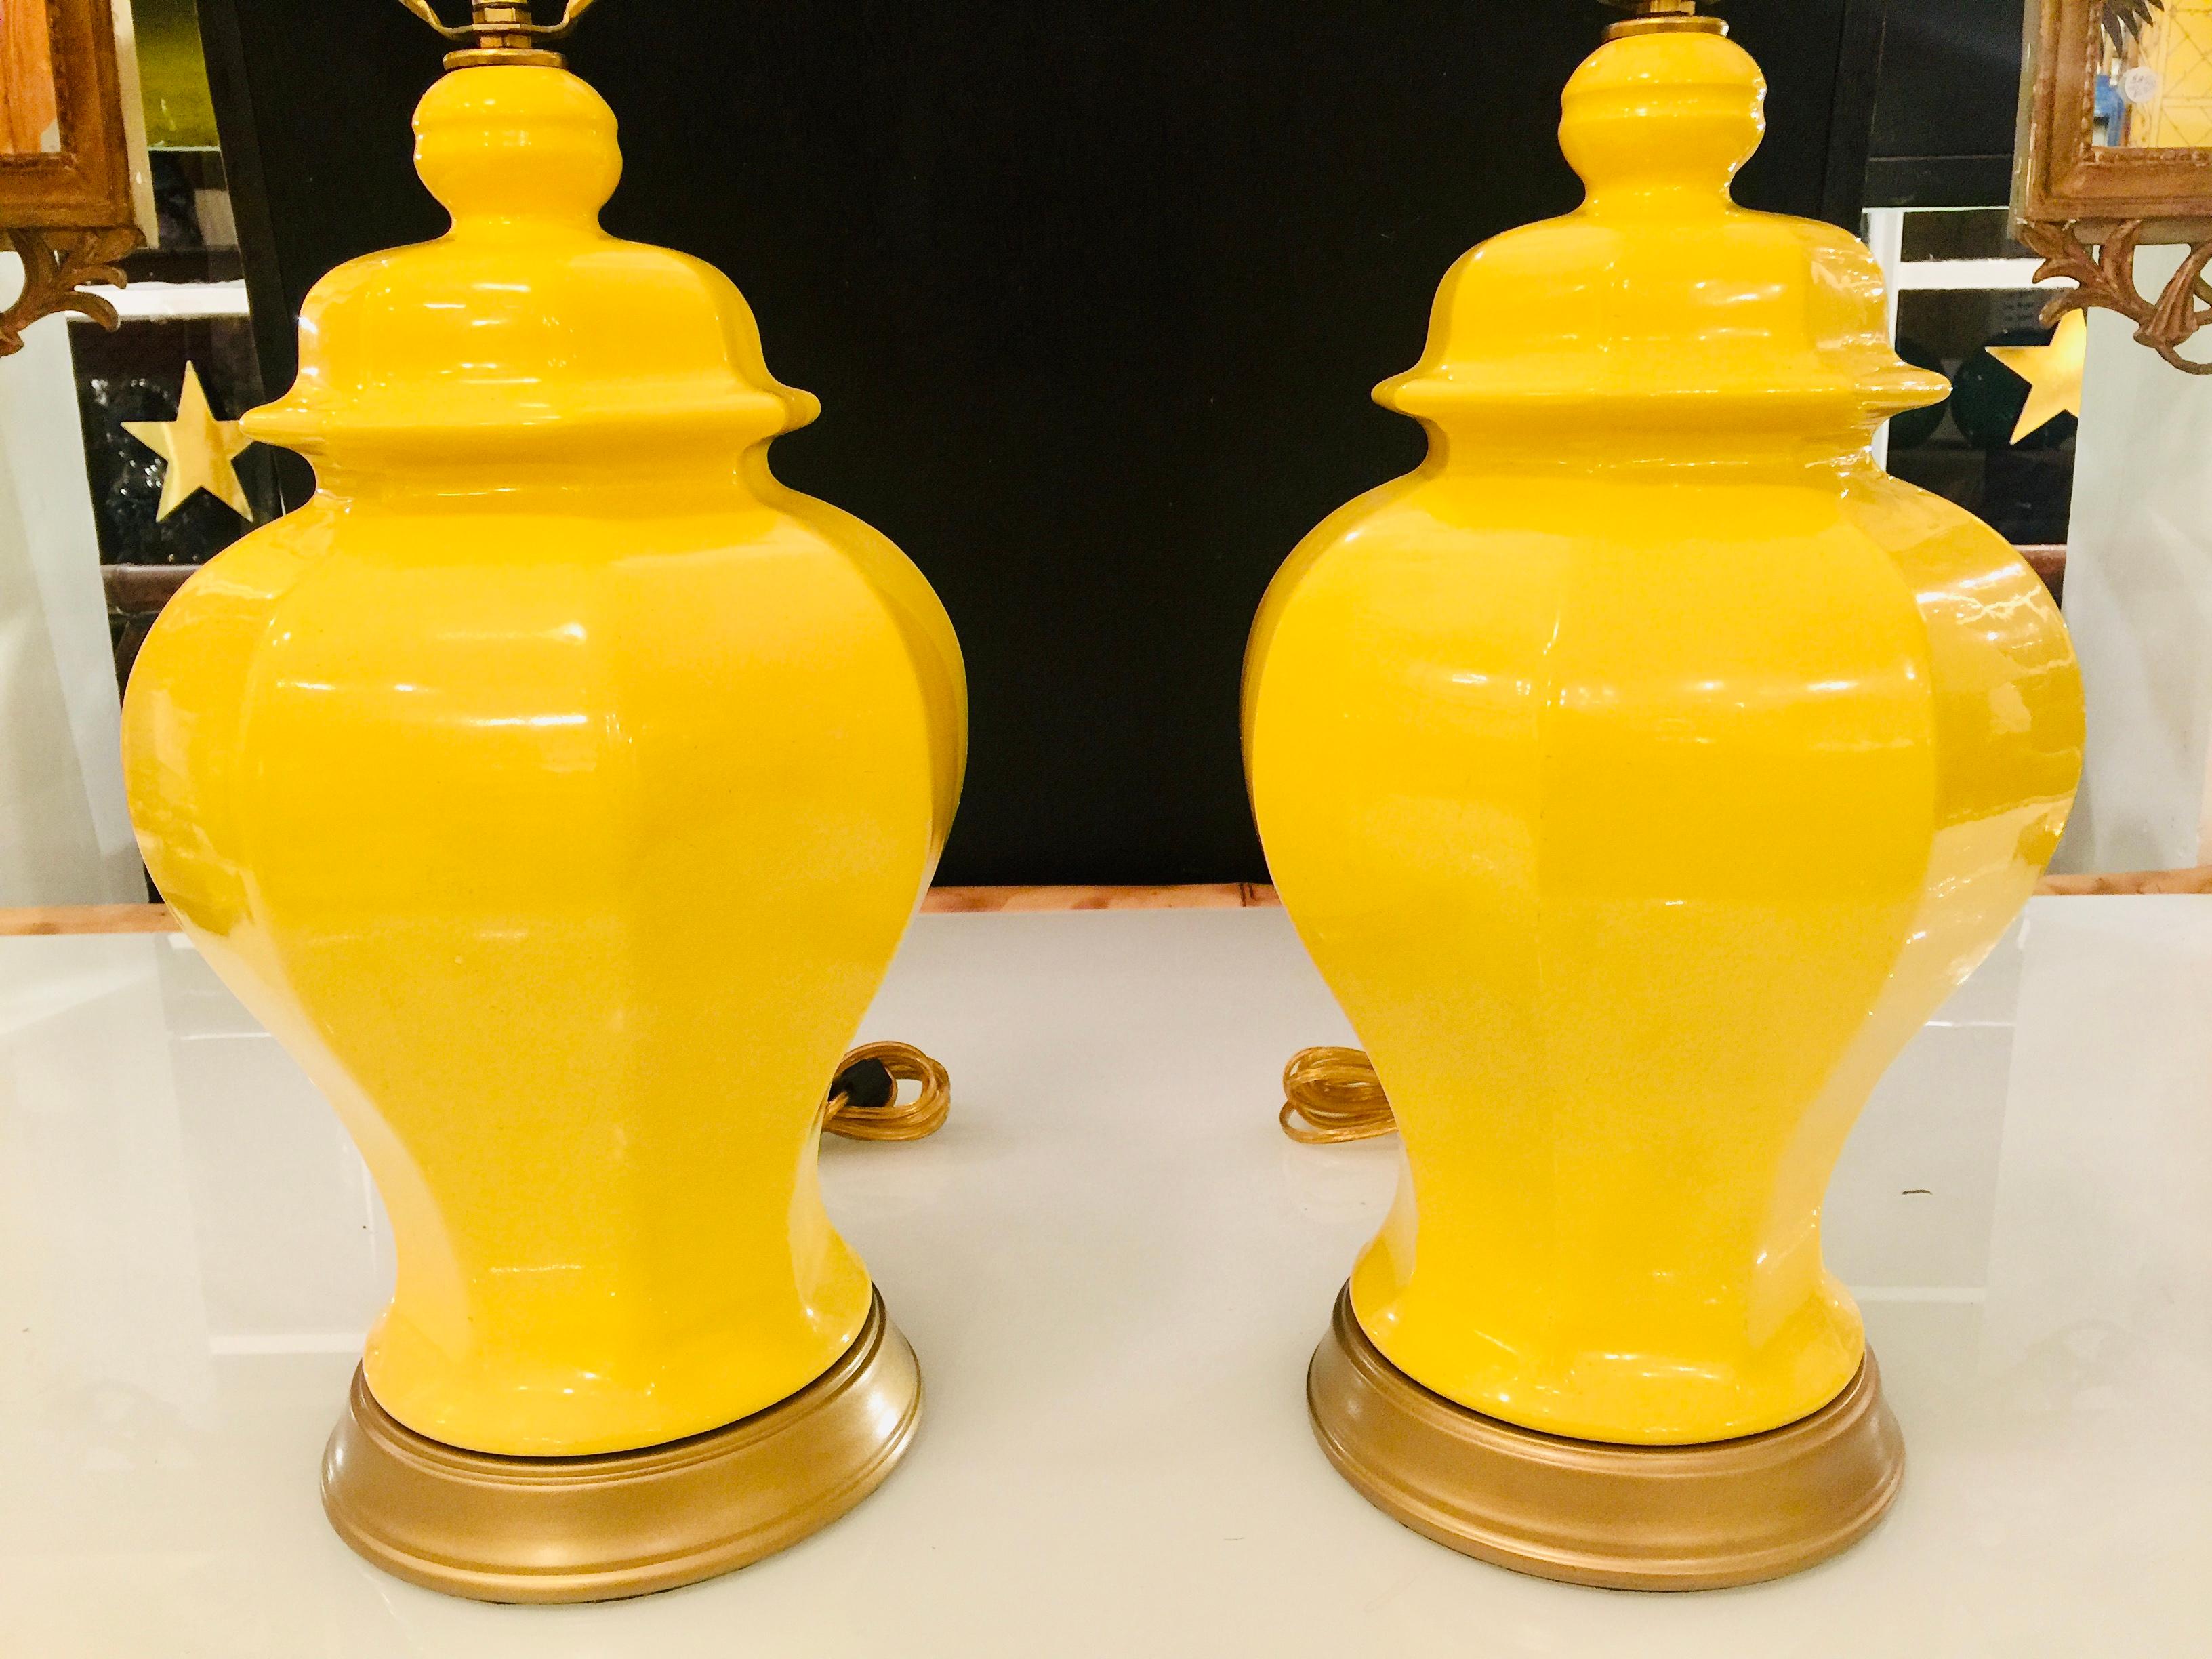 American midcentury yellow temple jar lamps
Newly electrified mounted on giltwood bases.